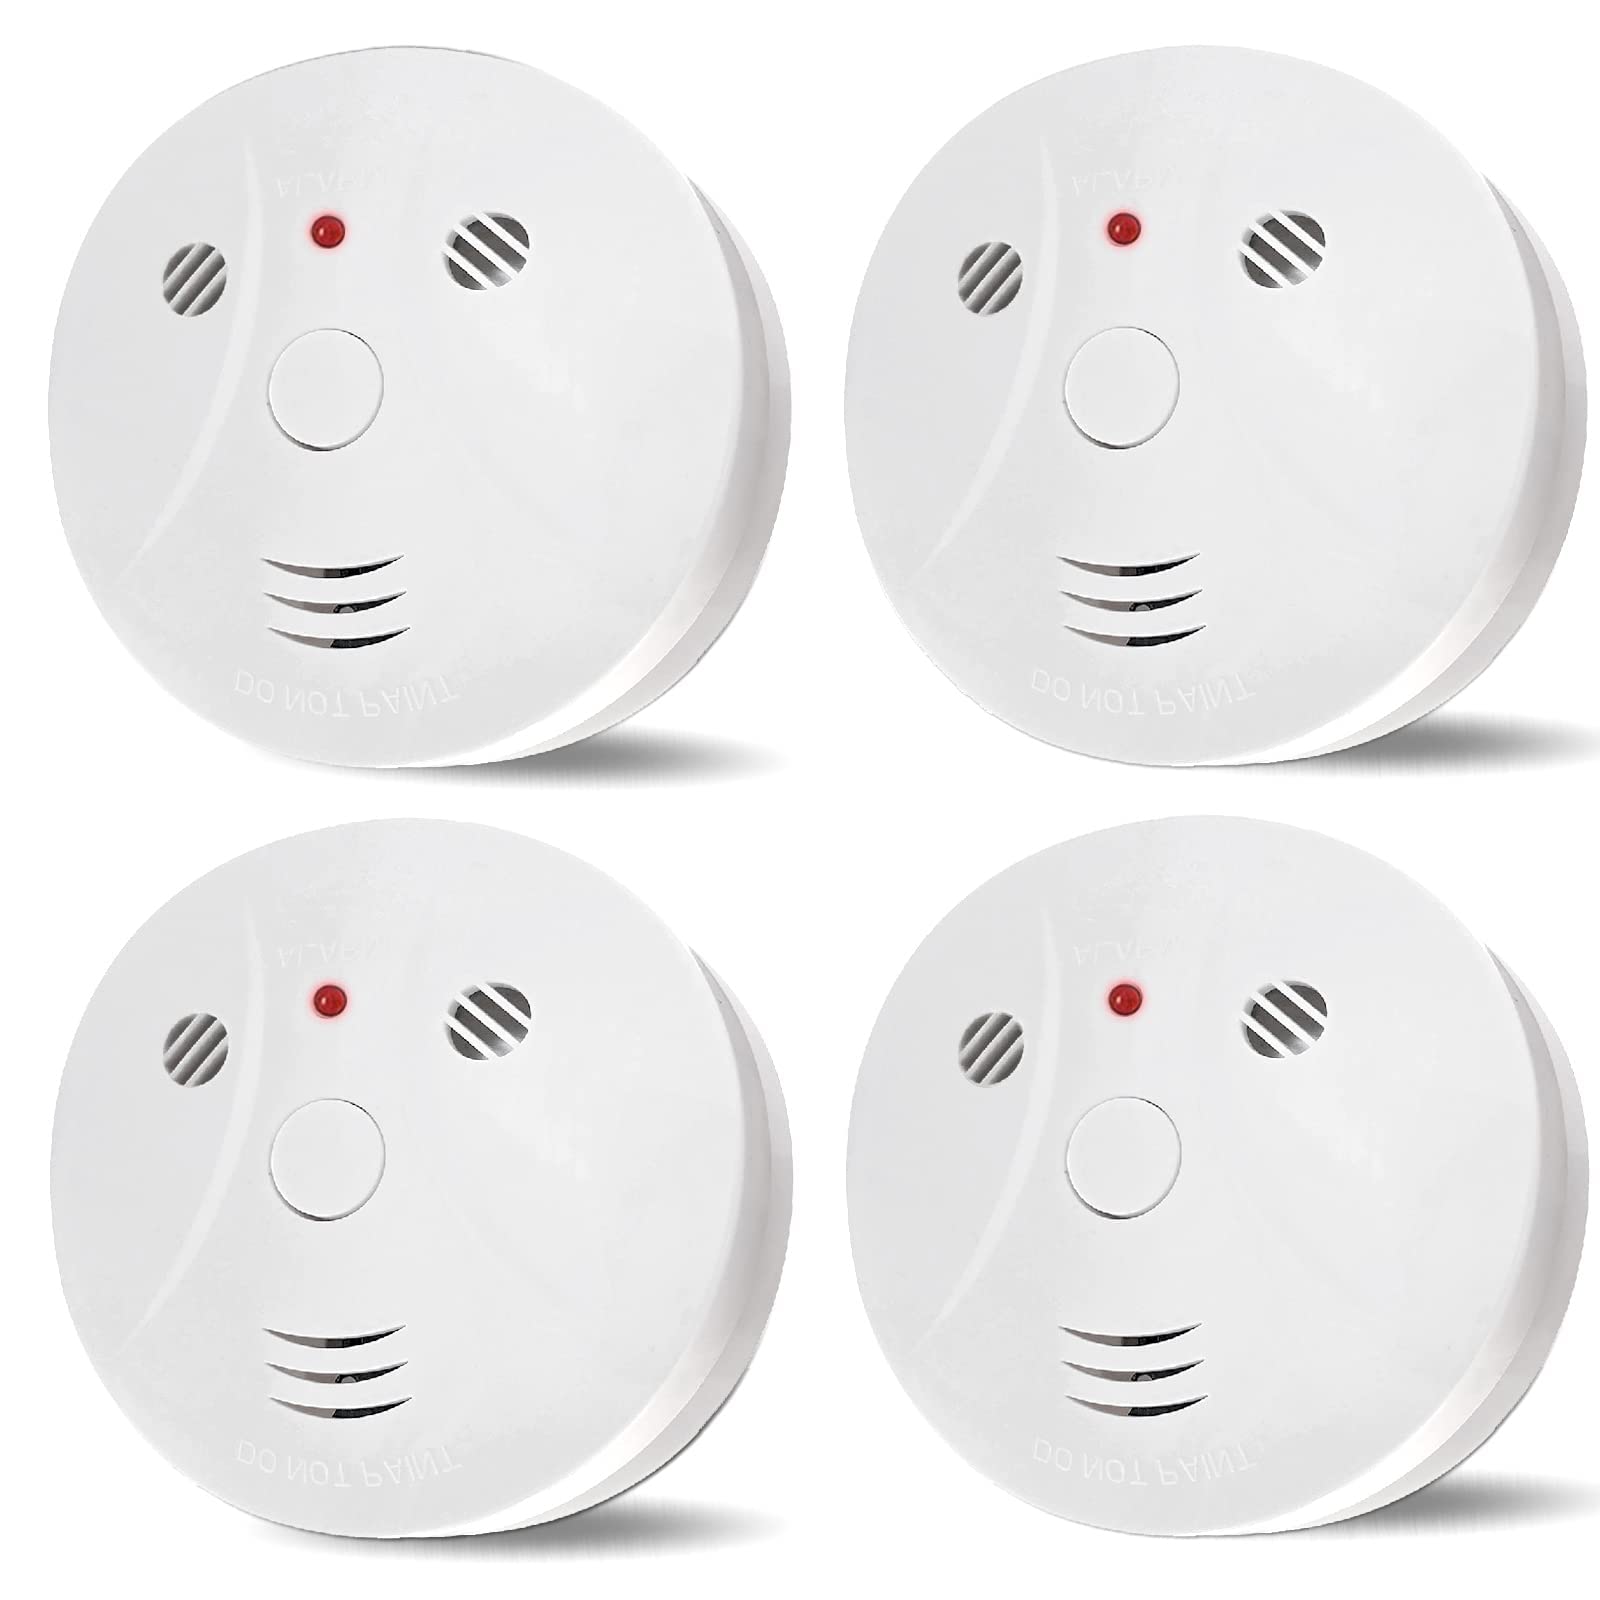 4 Pack Combination Smoke and Carbon Monoxide Detector Battery Operated Travel Portable Photoelectric FireCo Alarm for Home